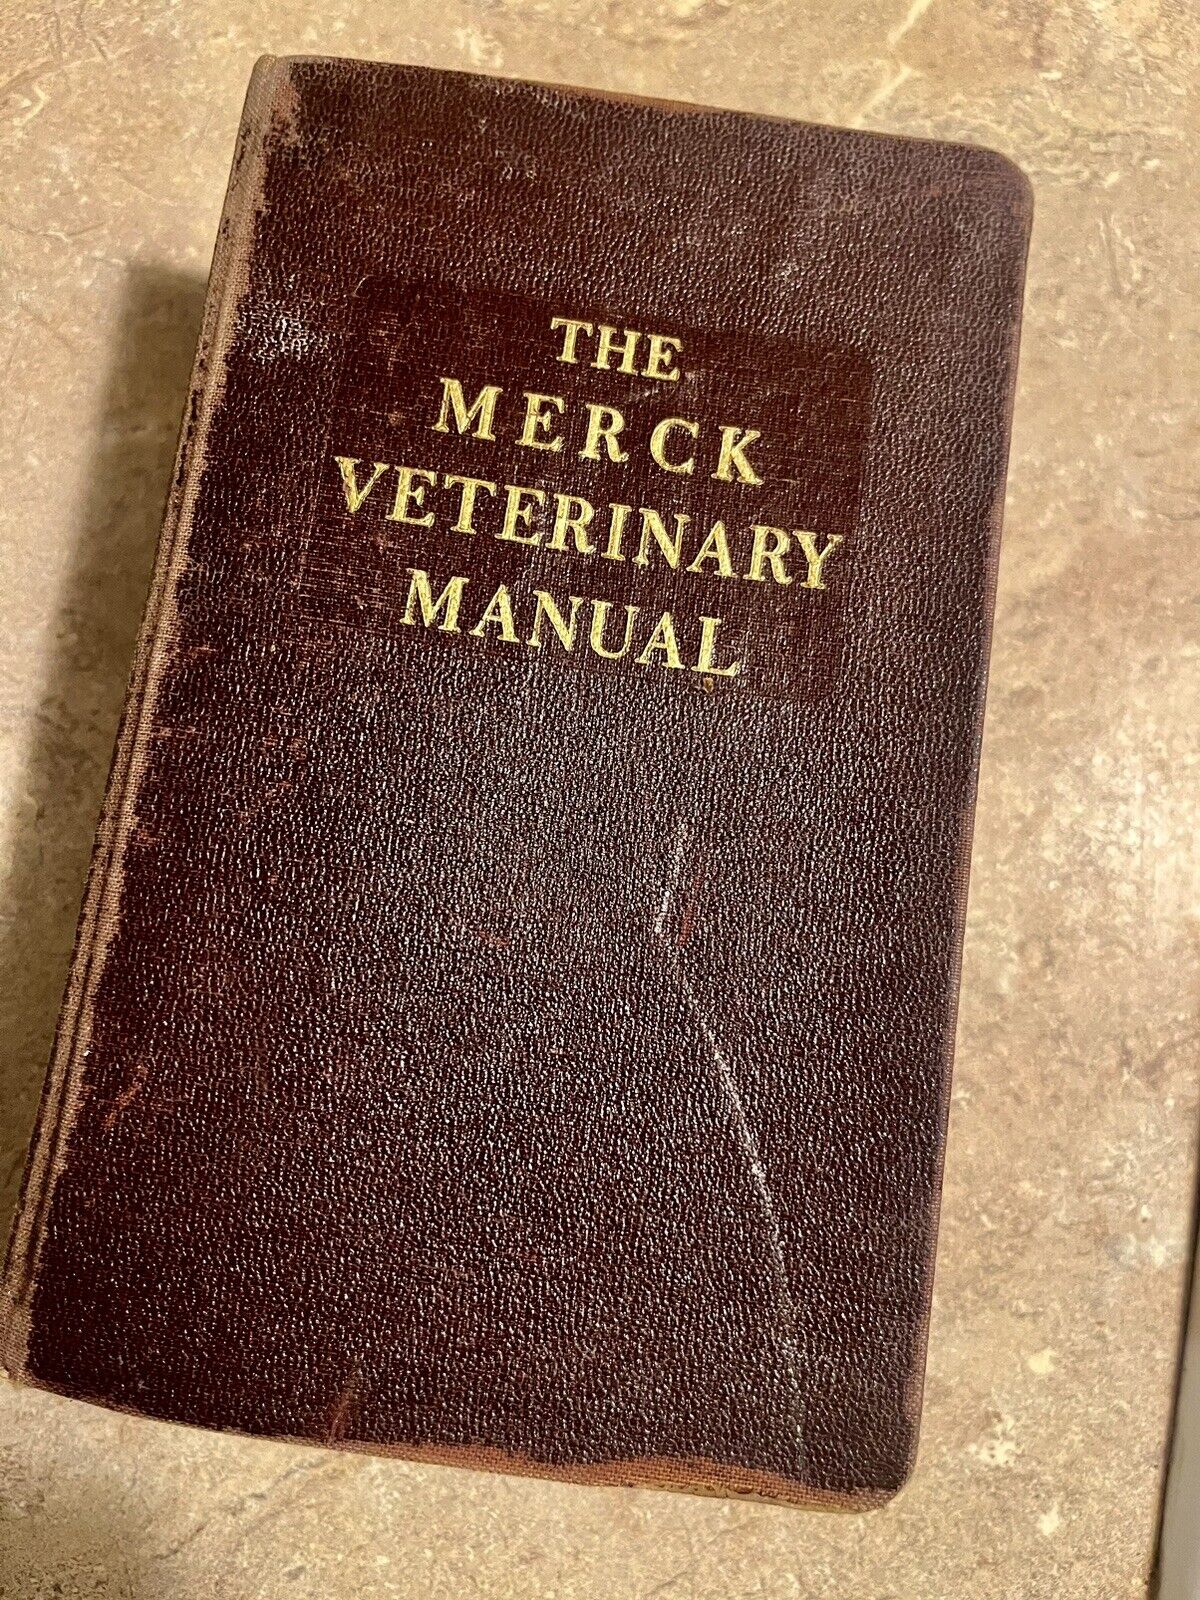 The Merck Veterinary Manual 1955 Reference Hardcover Book Animal Healthcare